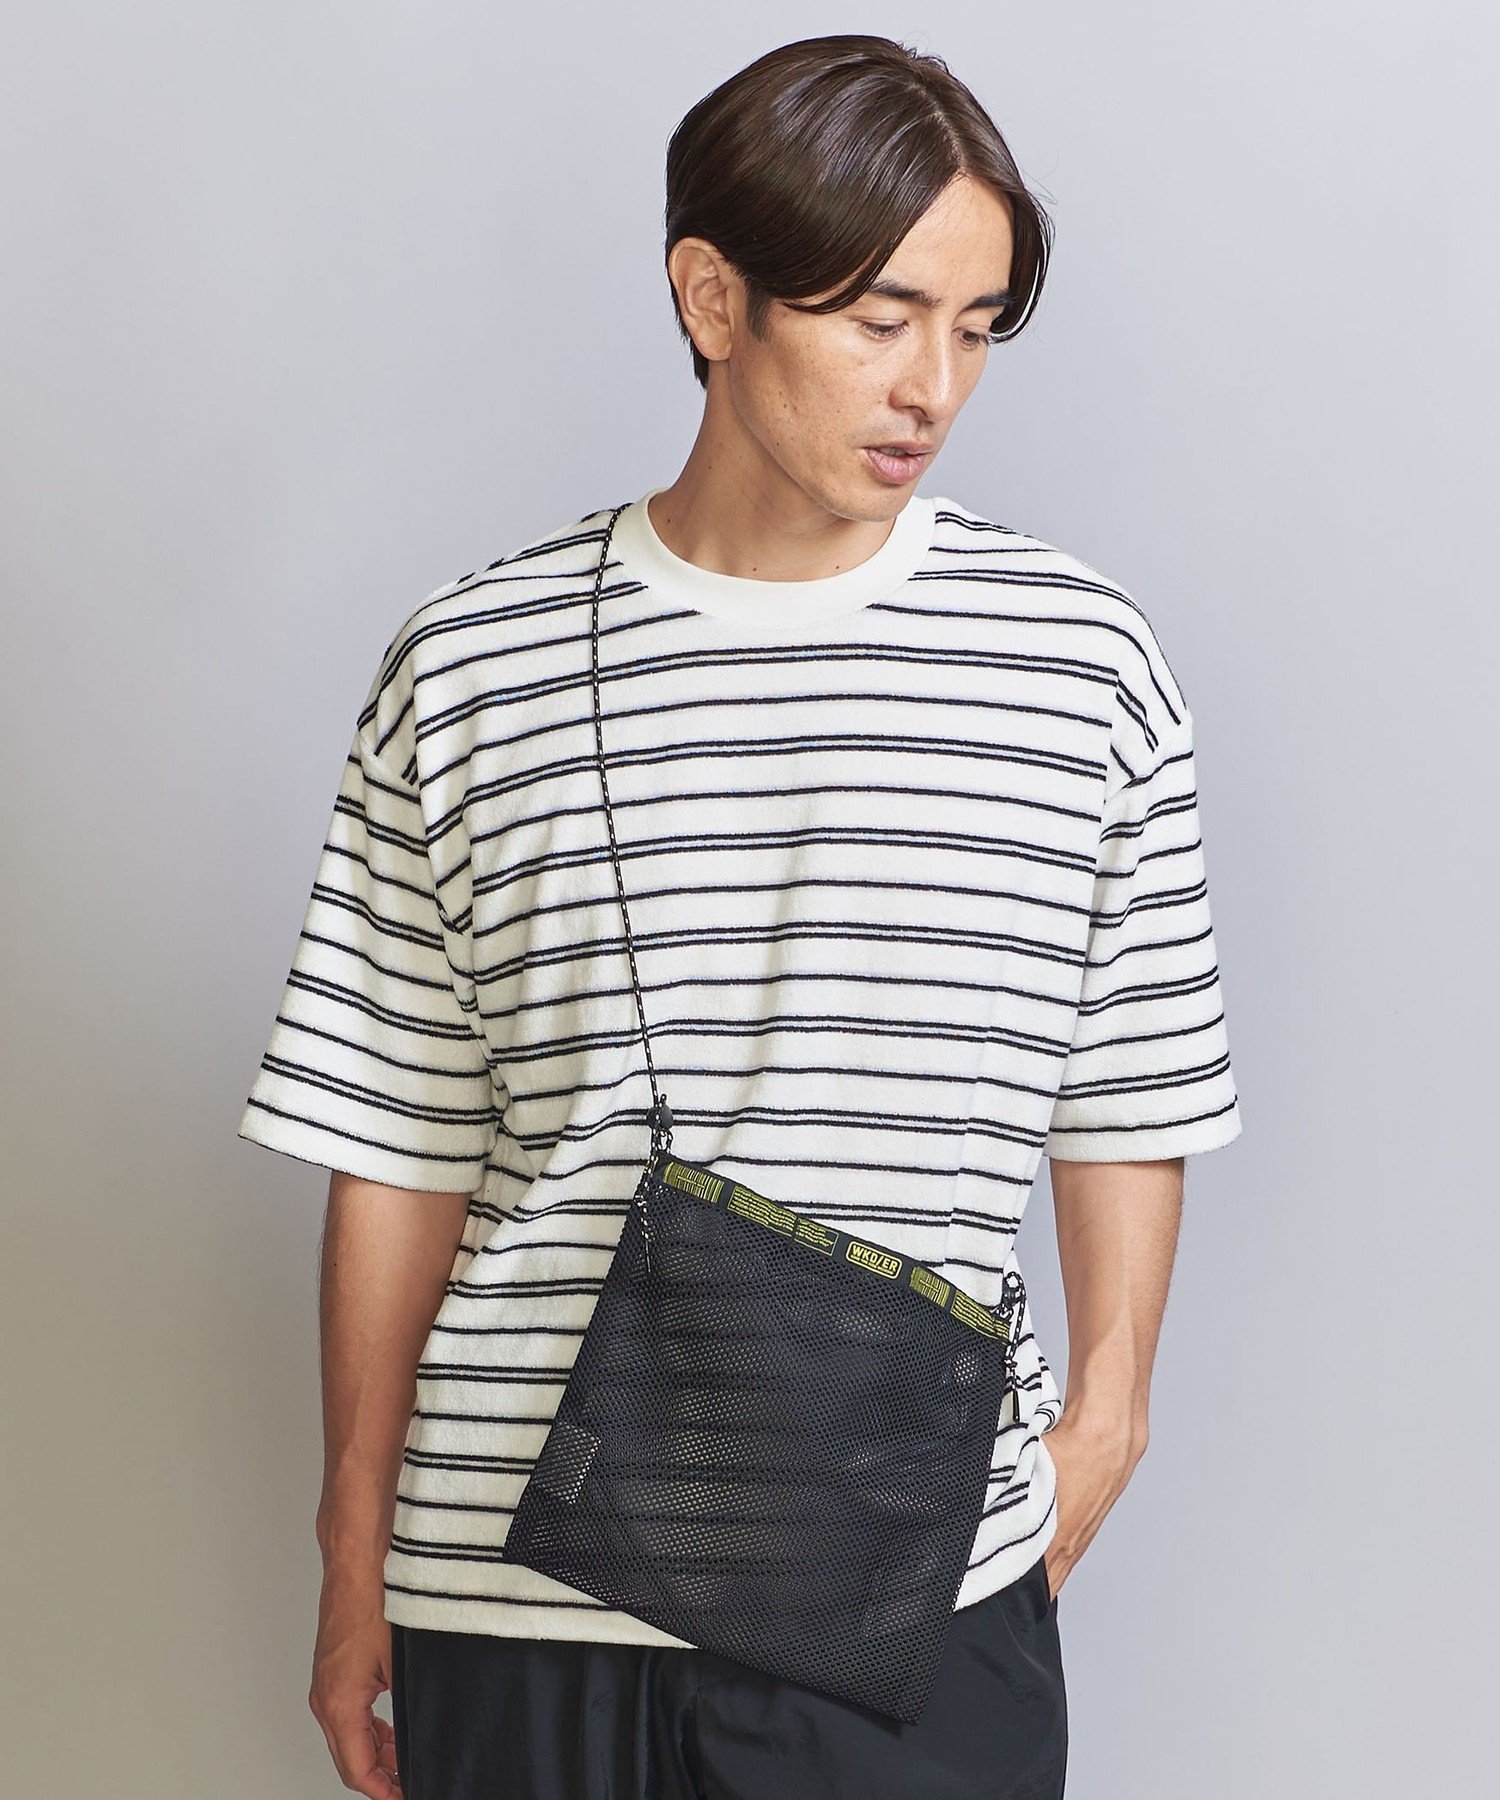 【SALE／30%OFF】BEAUTY&YOUTH UNITED ARROWS ＜WEEKEND(ER)＞ MESH FLAT SHOULDER/バッグ ユナイテッドアローズ アウトレット バッグ ショルダーバッグ ブラック ホワイト